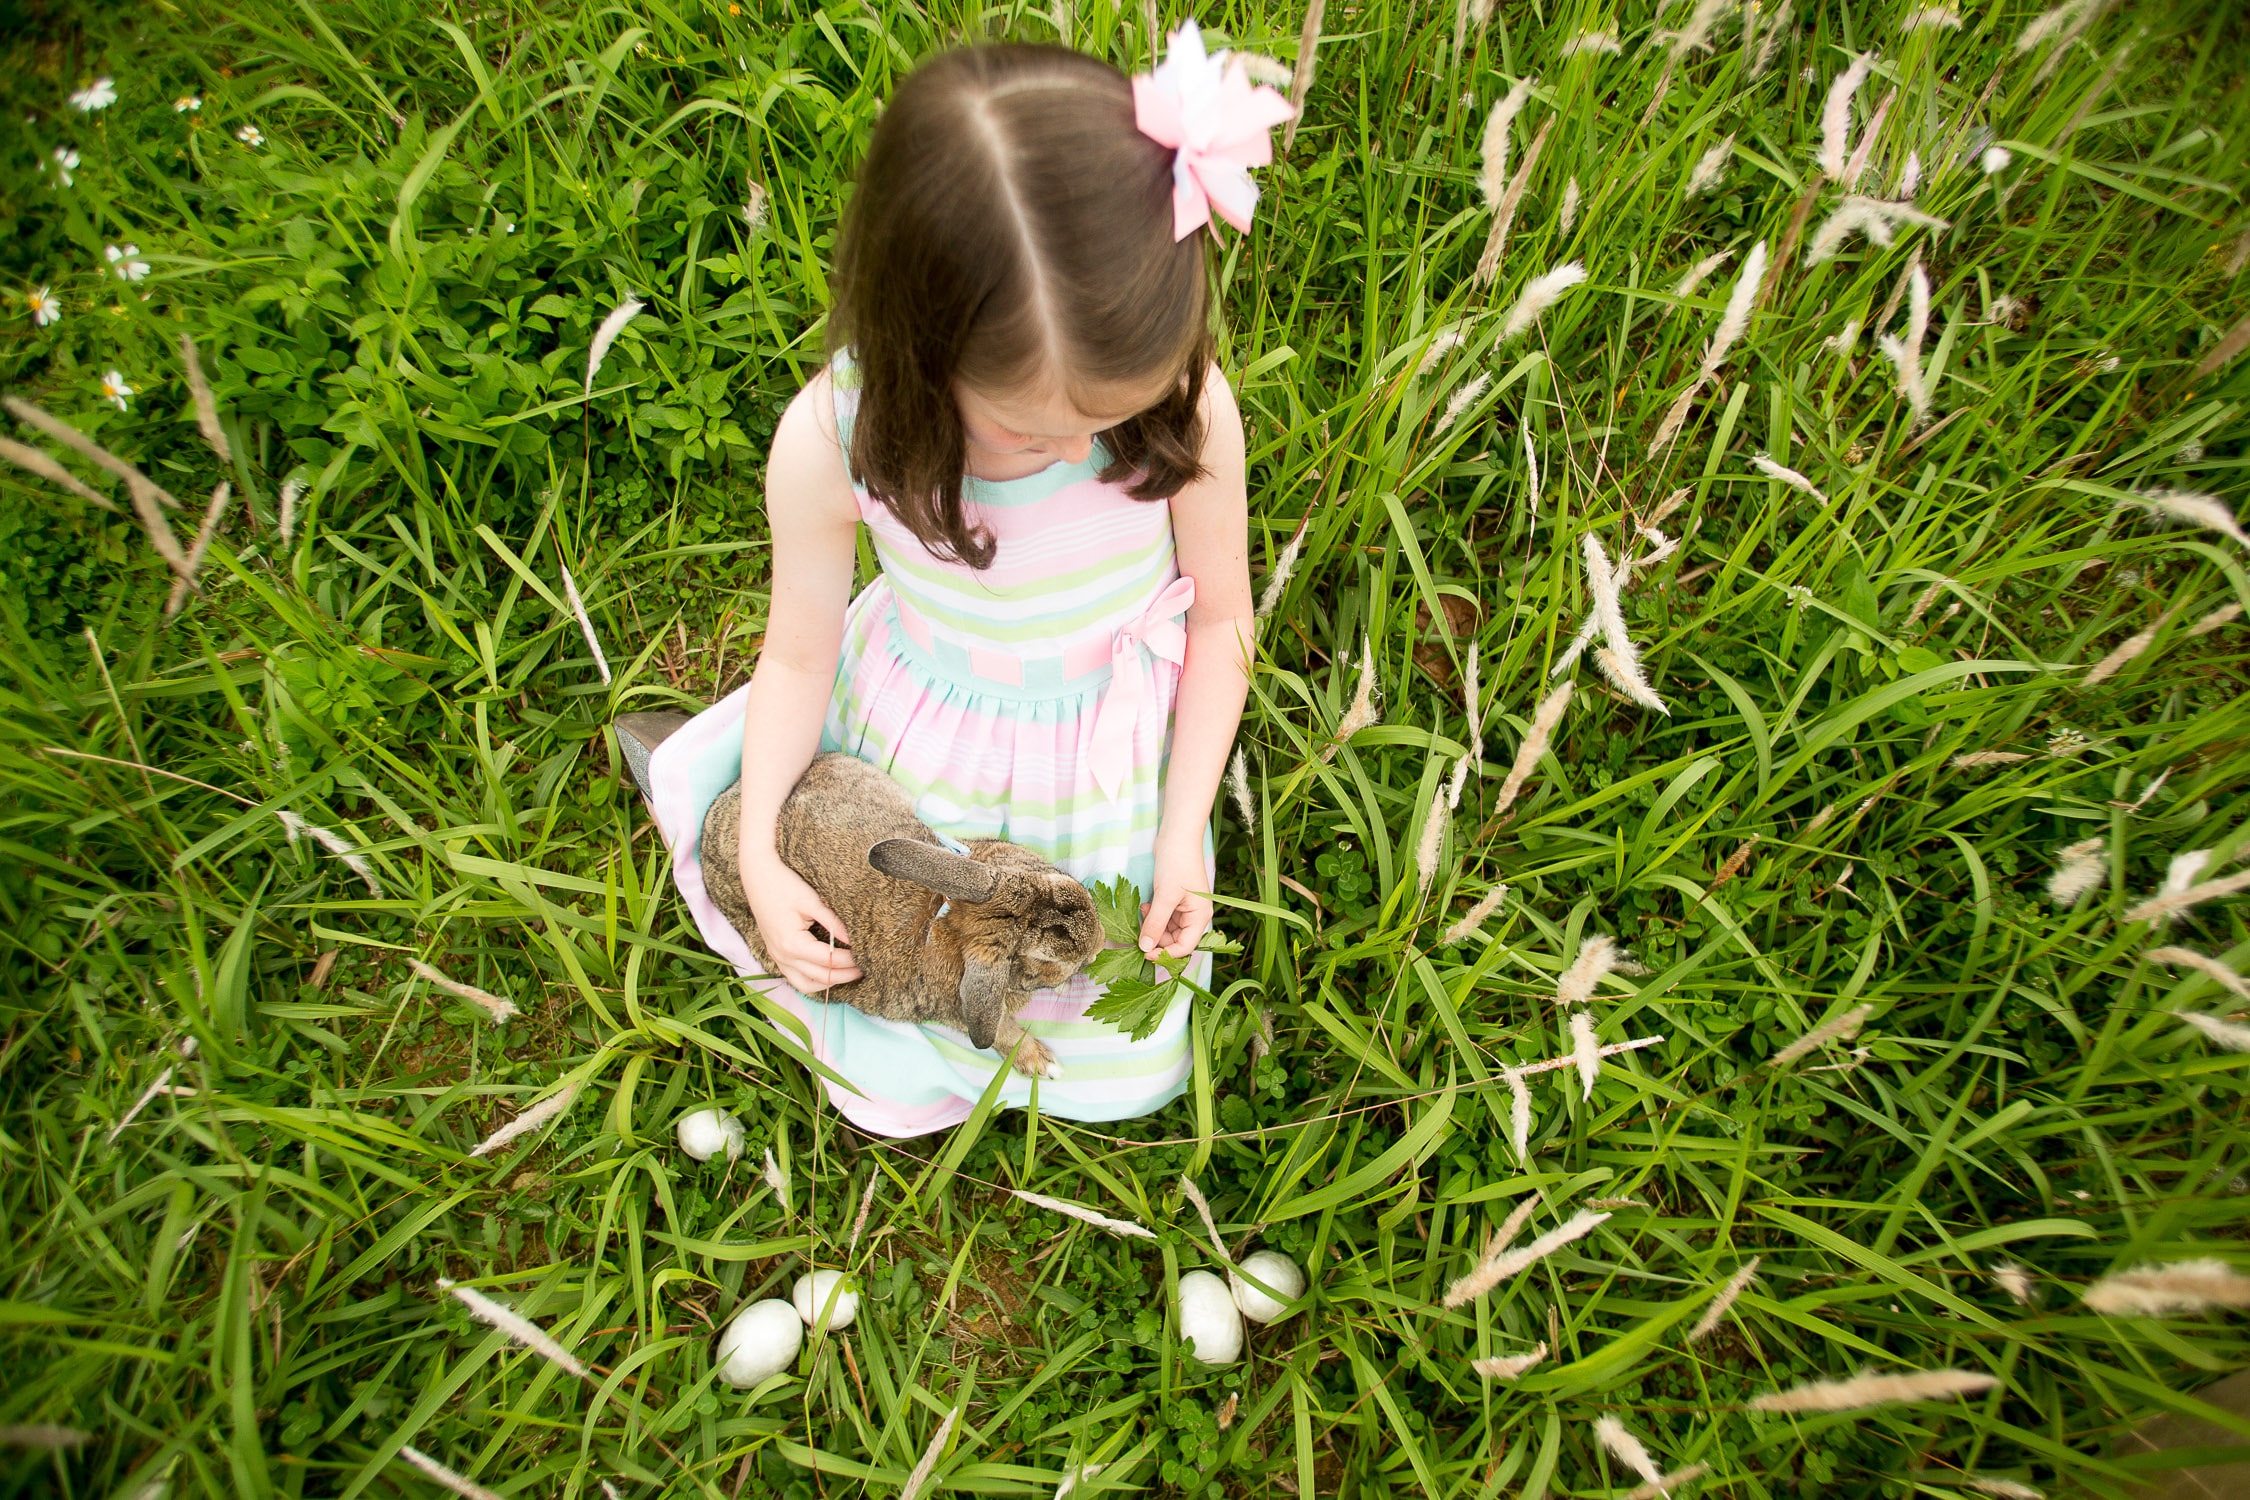 Easter mini sessions in a grassy field with a live bunny rabbit by Alison Bell, Photographer